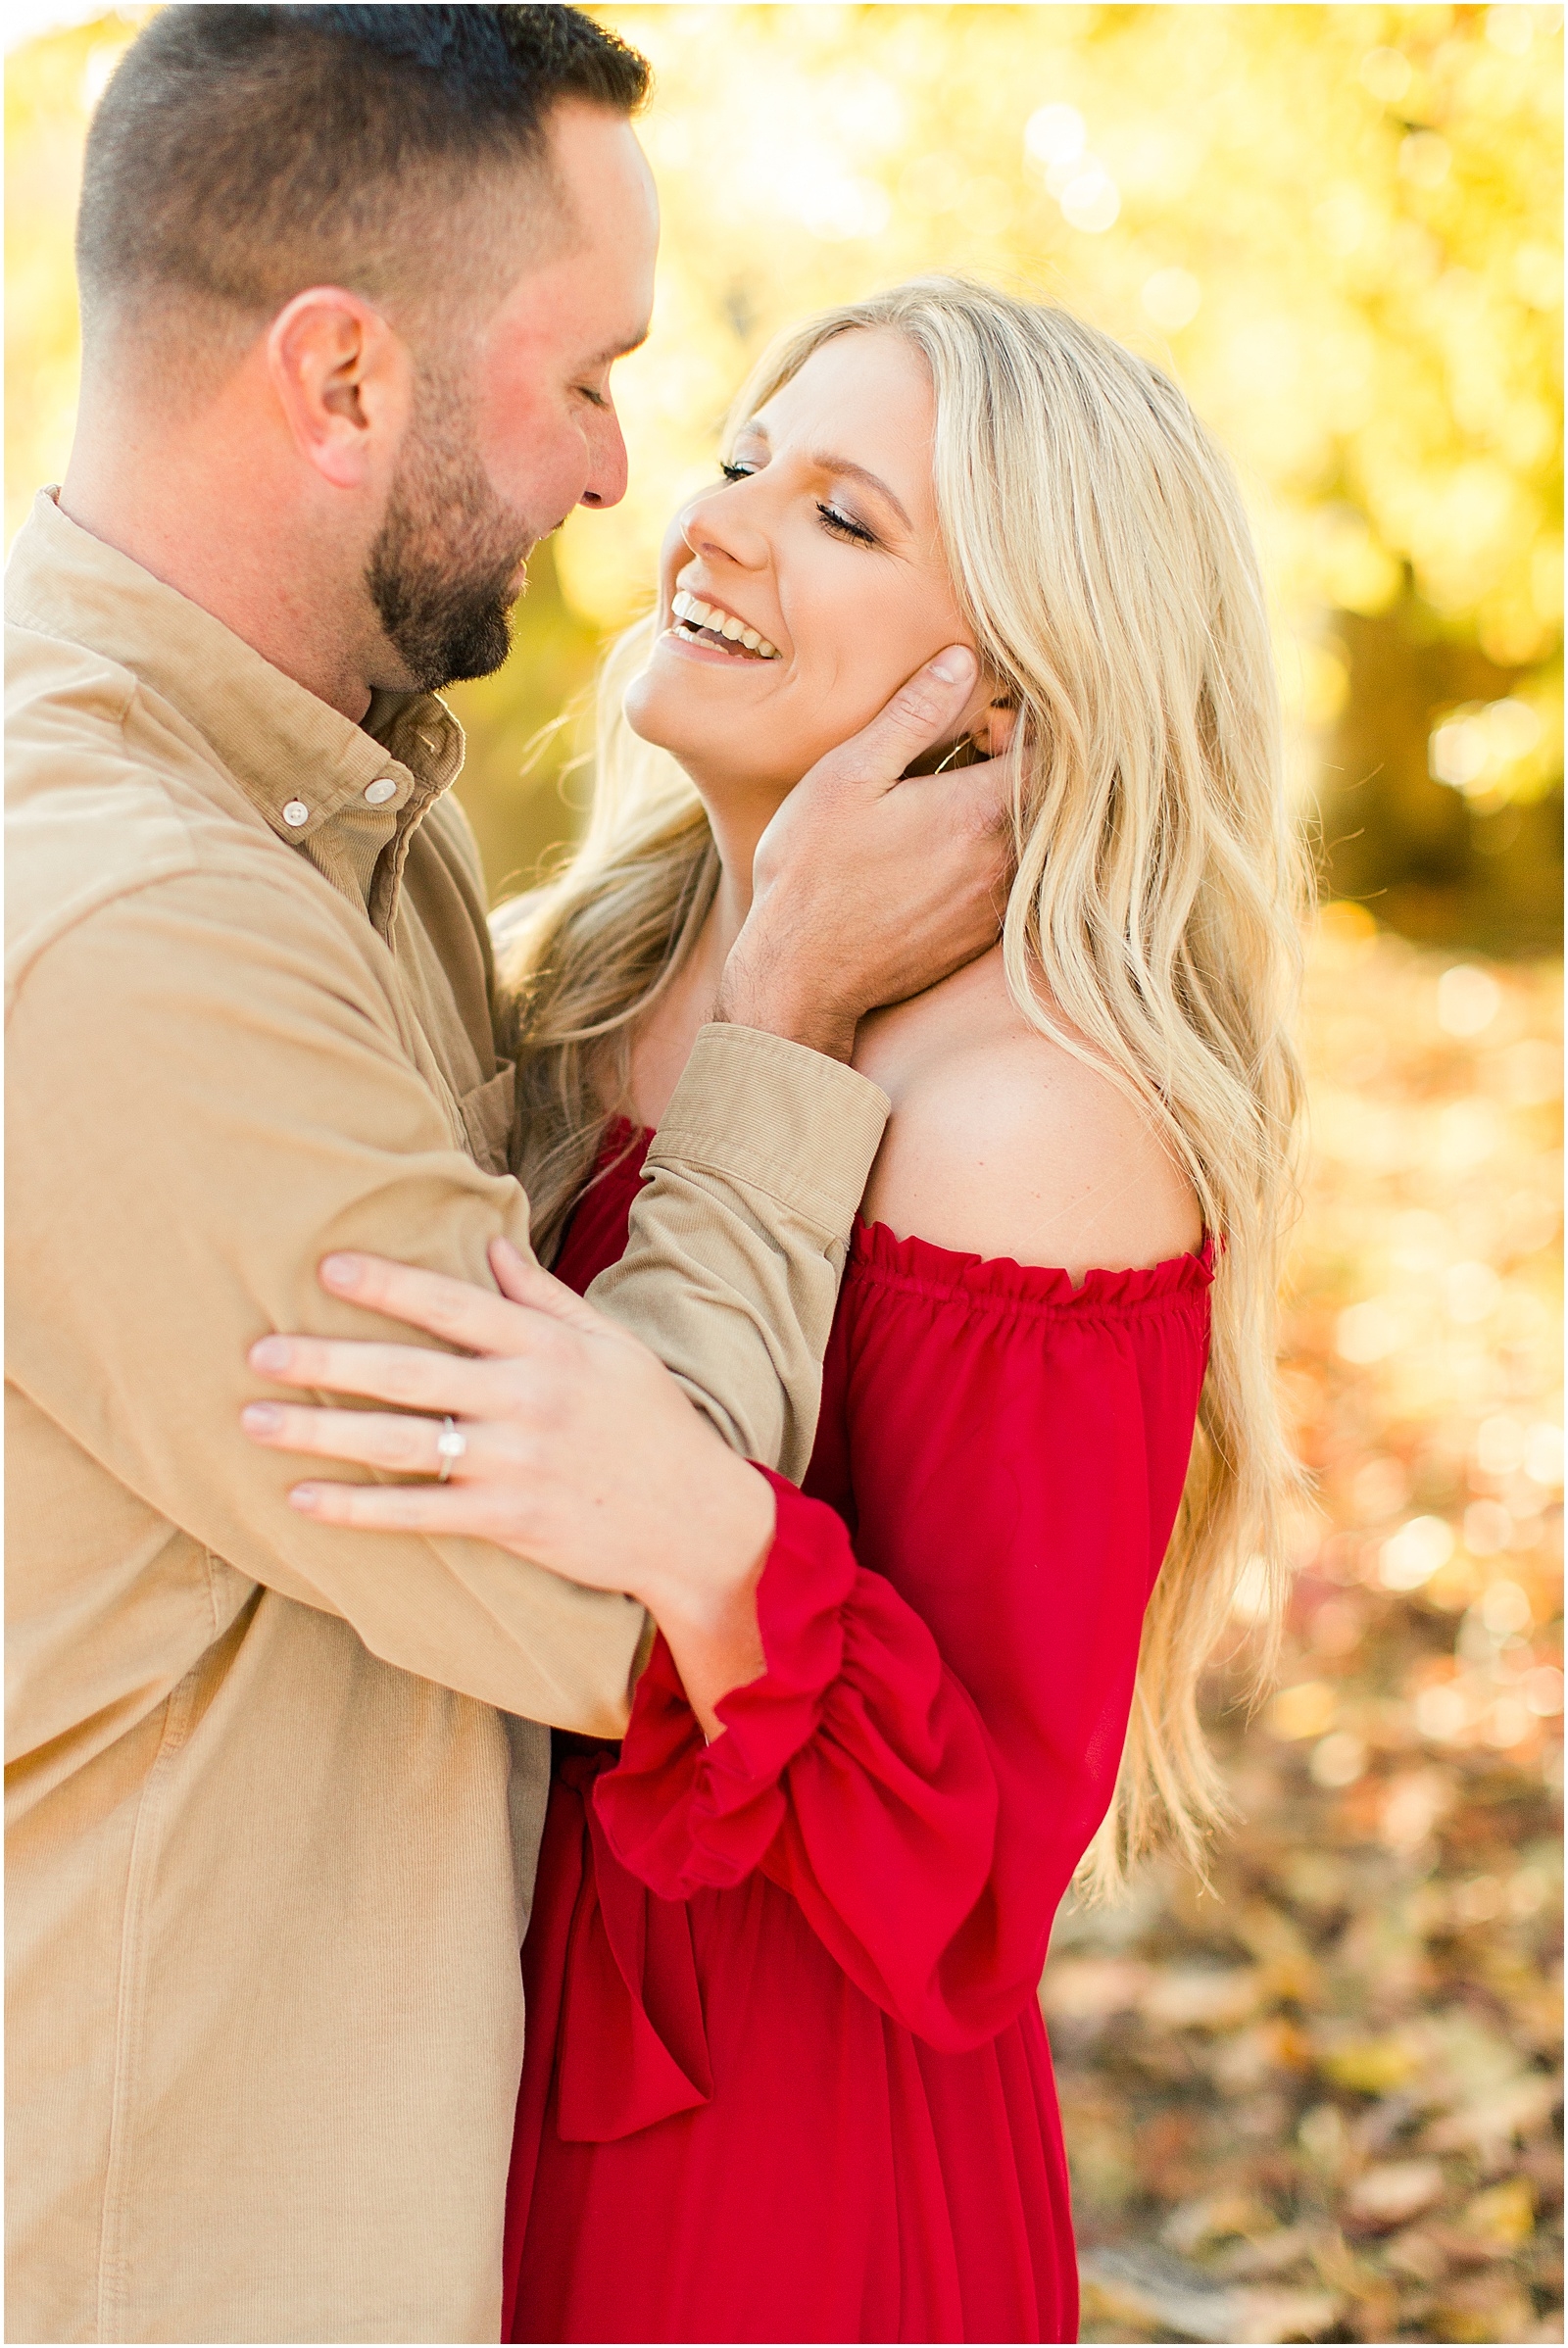 A Southern Indiana Engagement Session | Charleston and Erin | Bret and Brandie Photography026.jpg